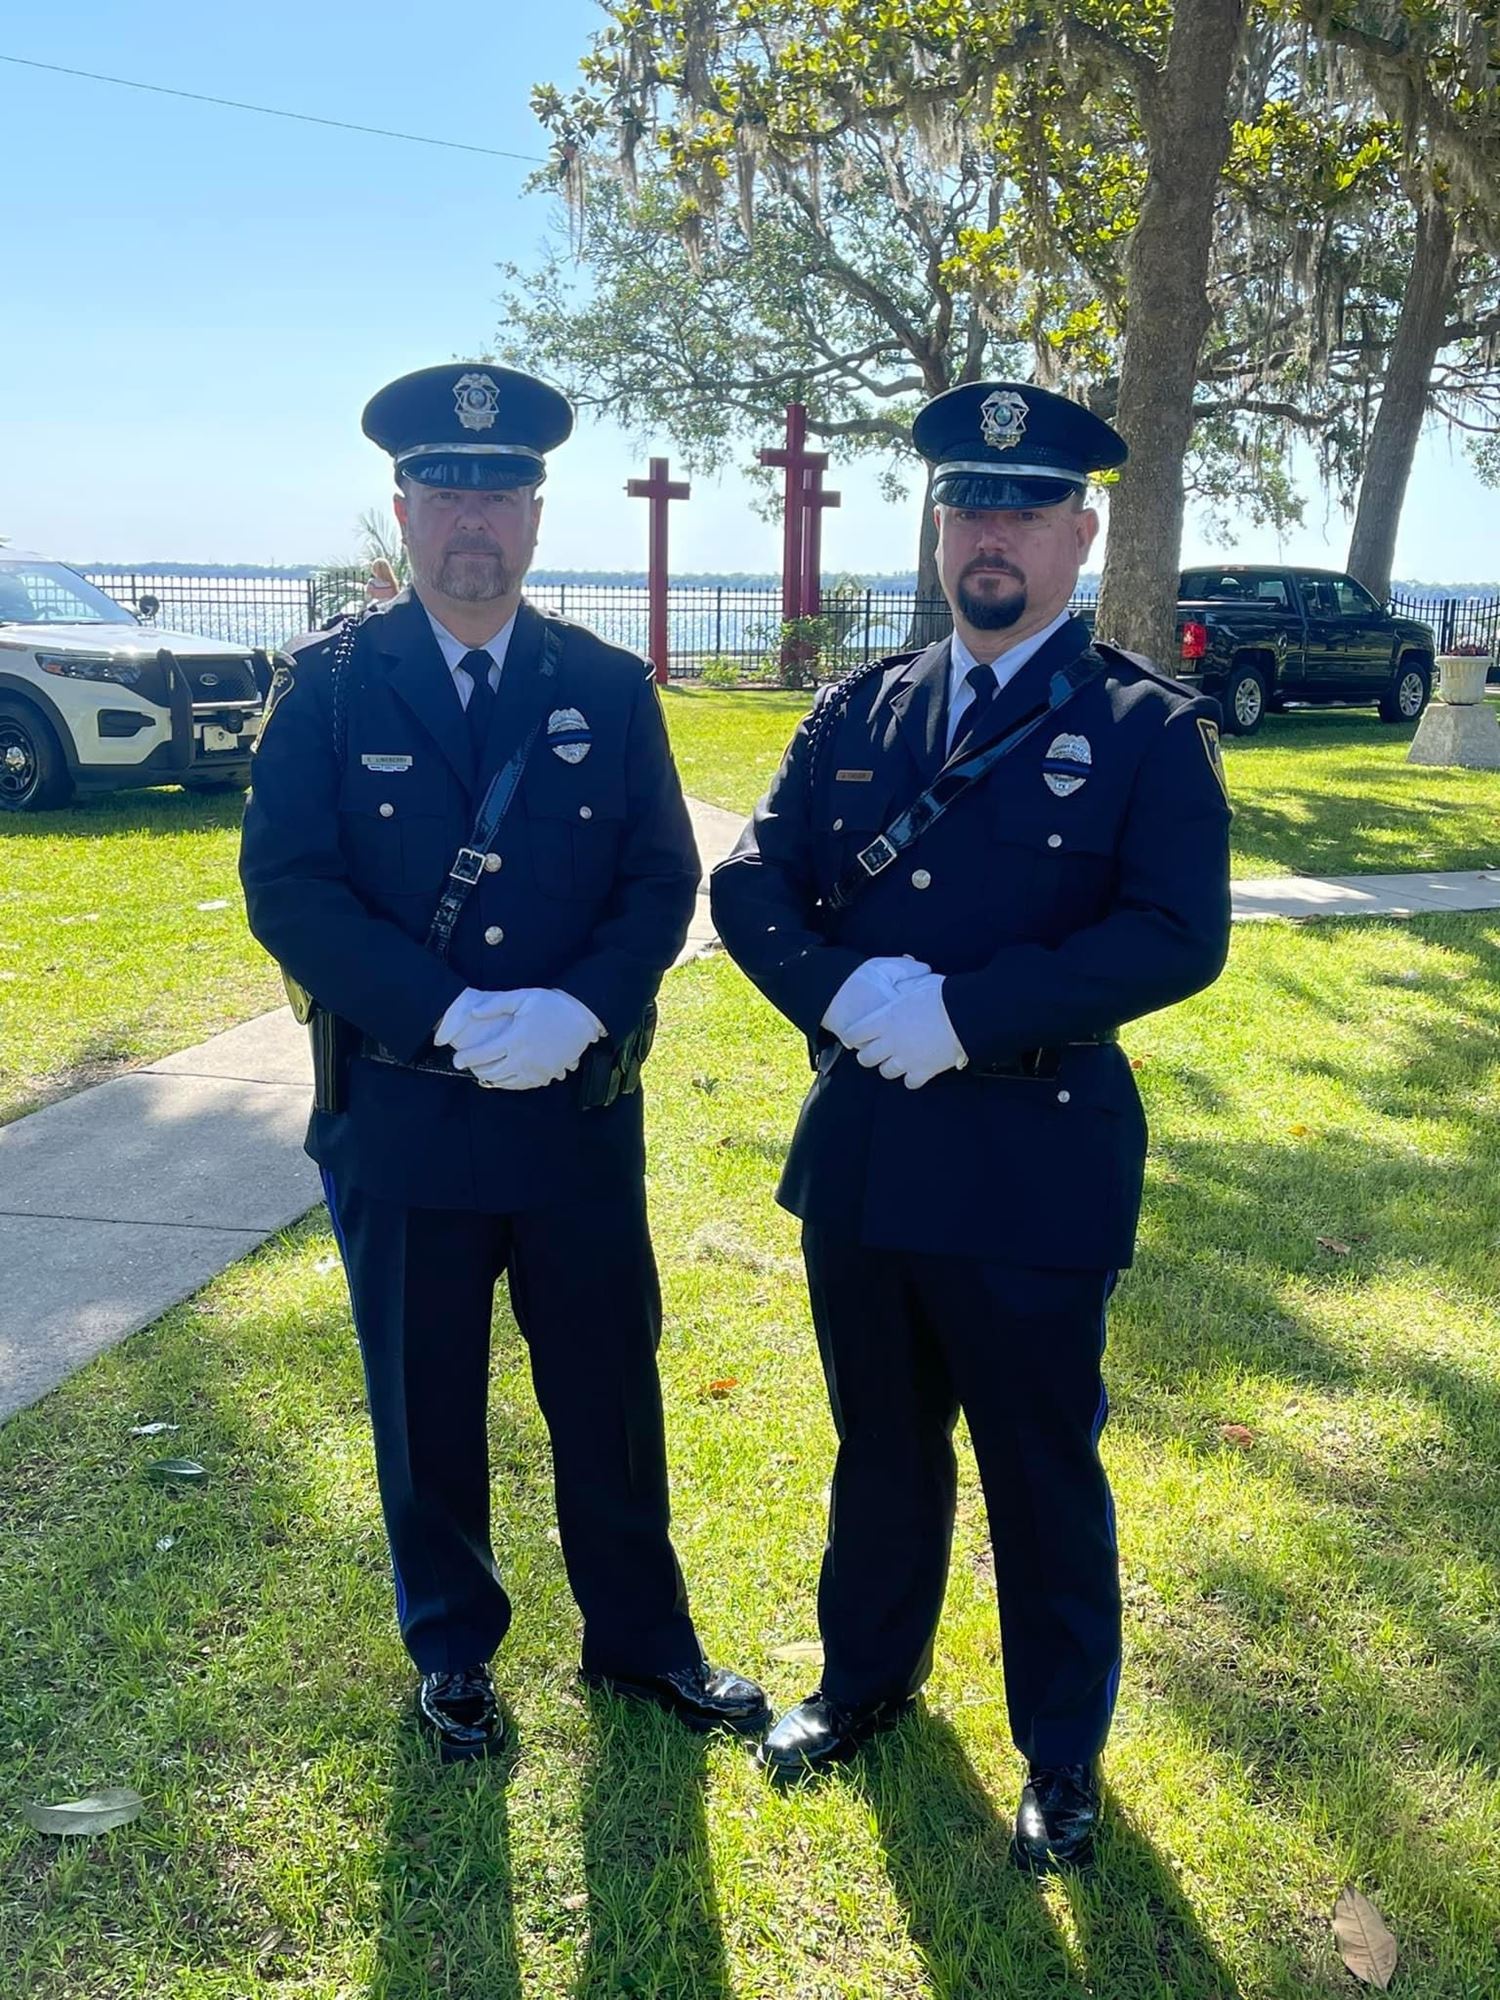 2 officers in dress uniform on a sunny day